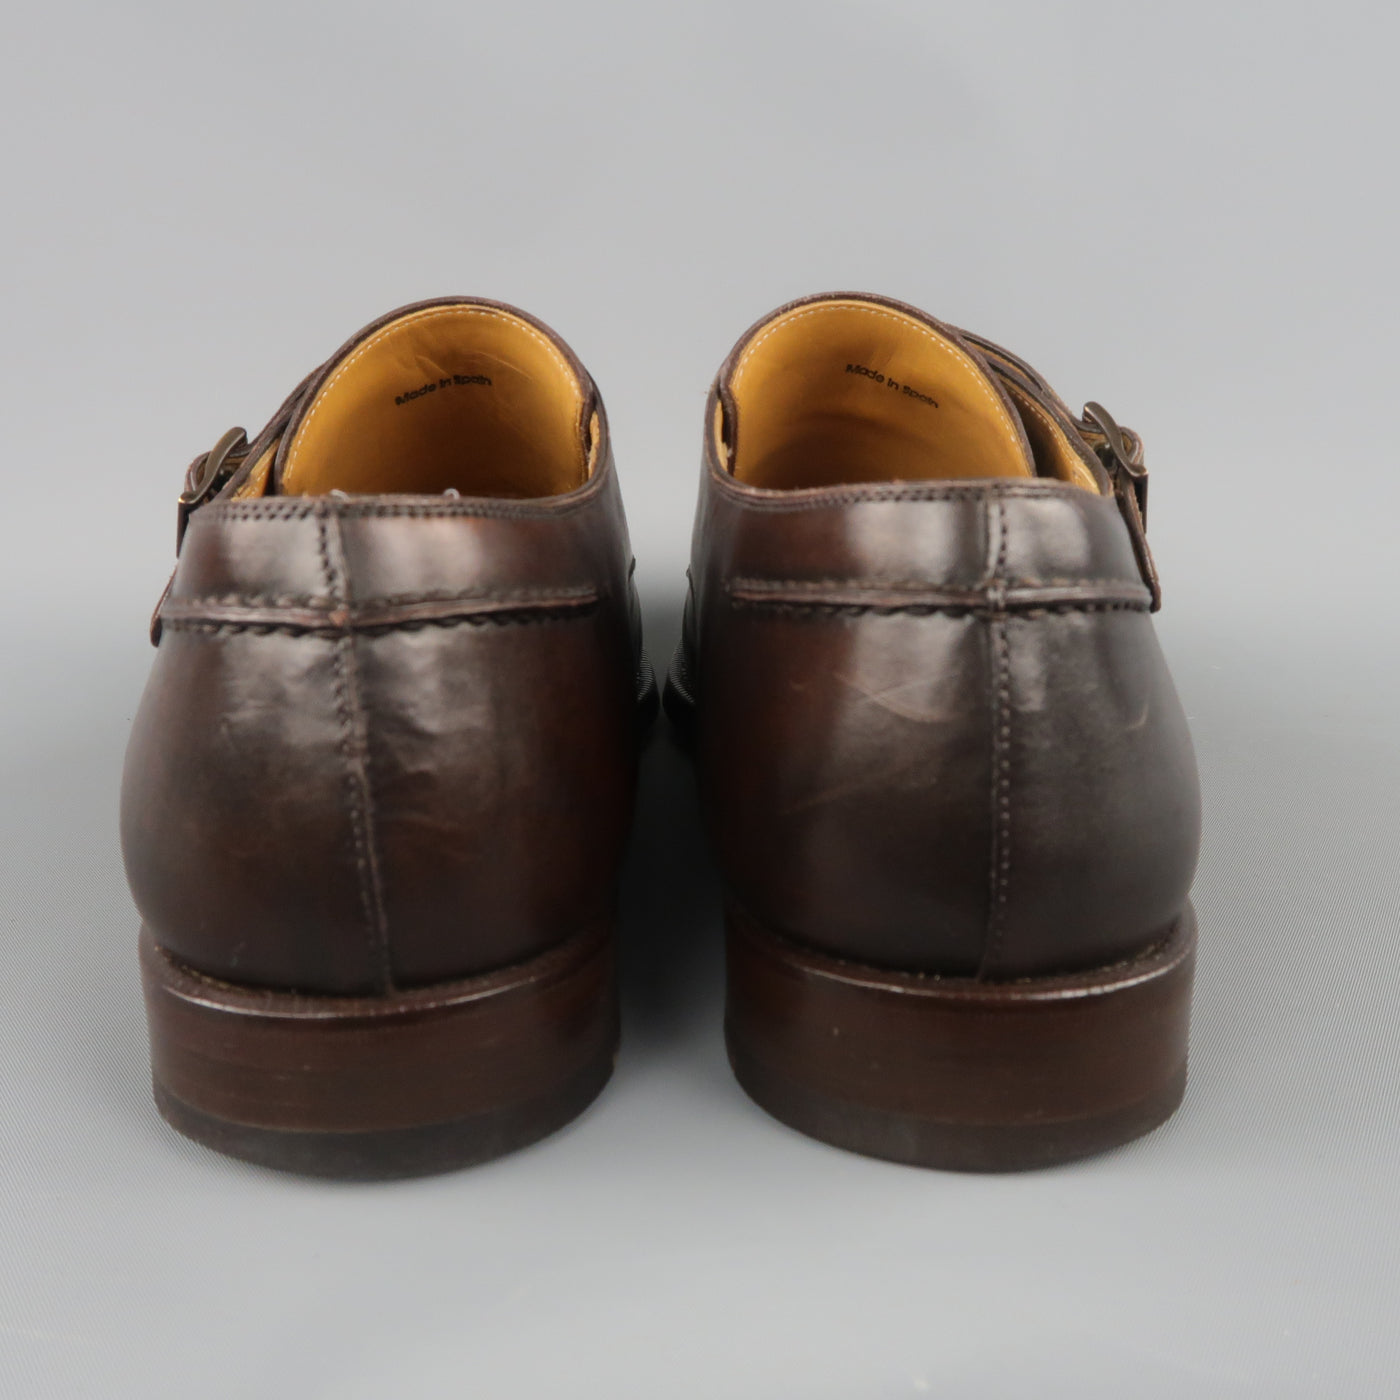 MAGNANNI Size 12 Brown Antique Leather Double Monk Strap Loafers